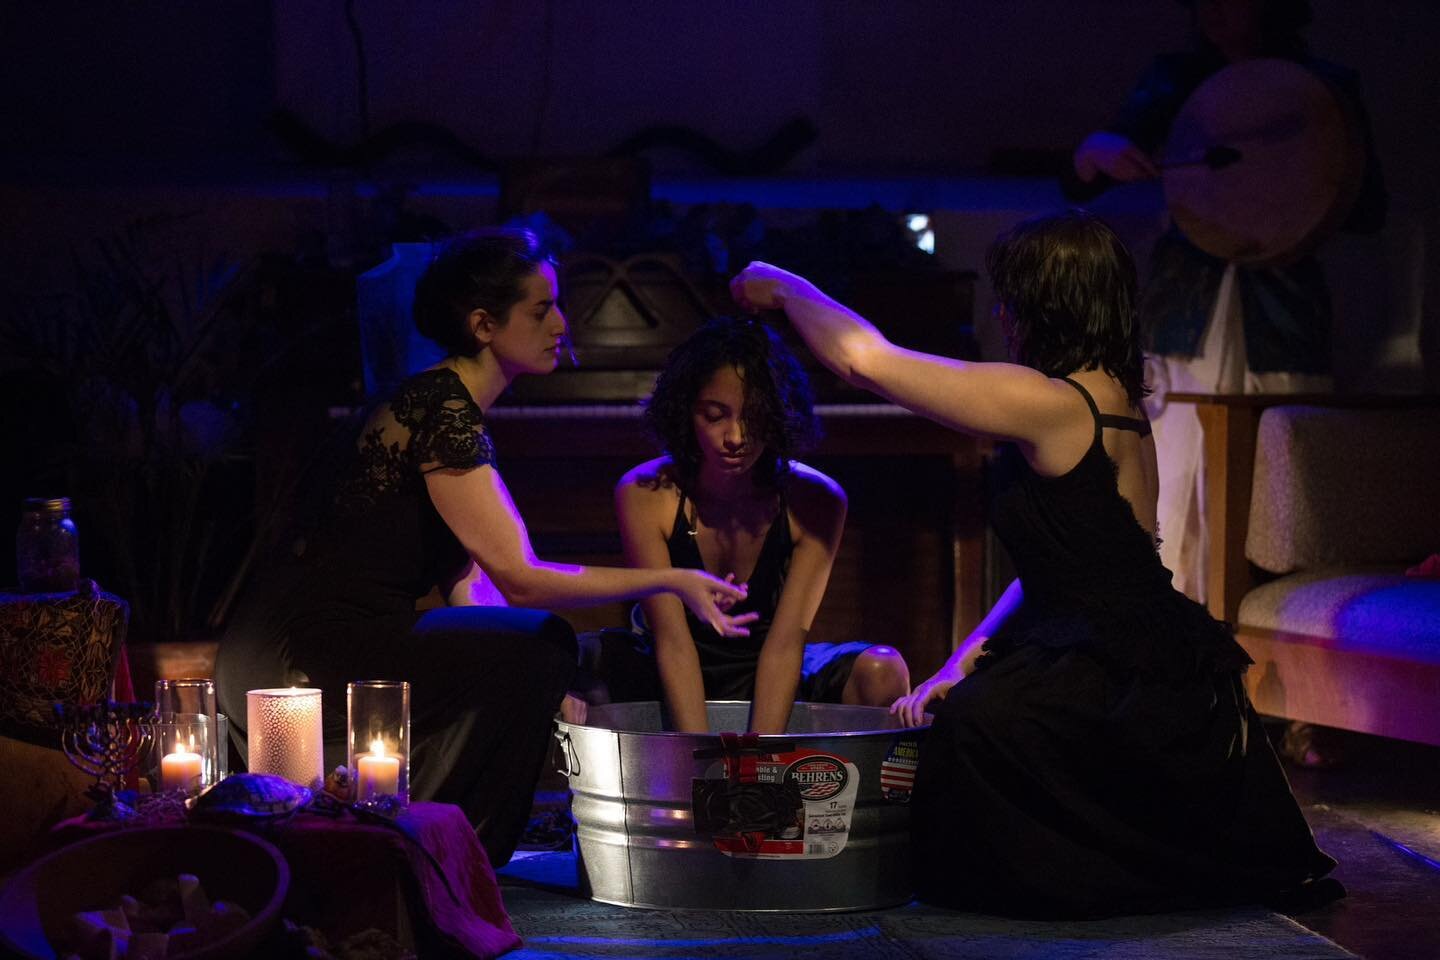 THE JUDITHS OF VIRTUOUS DISSENT | Performed December 4th, 2018 at Mister Rogers in Brooklyn, NY. 

The Judiths of Virtuous Dissent revives the story of Judith of Bethulia, the mythological rebel who drove the oppressor&rsquo;s knife straight into his